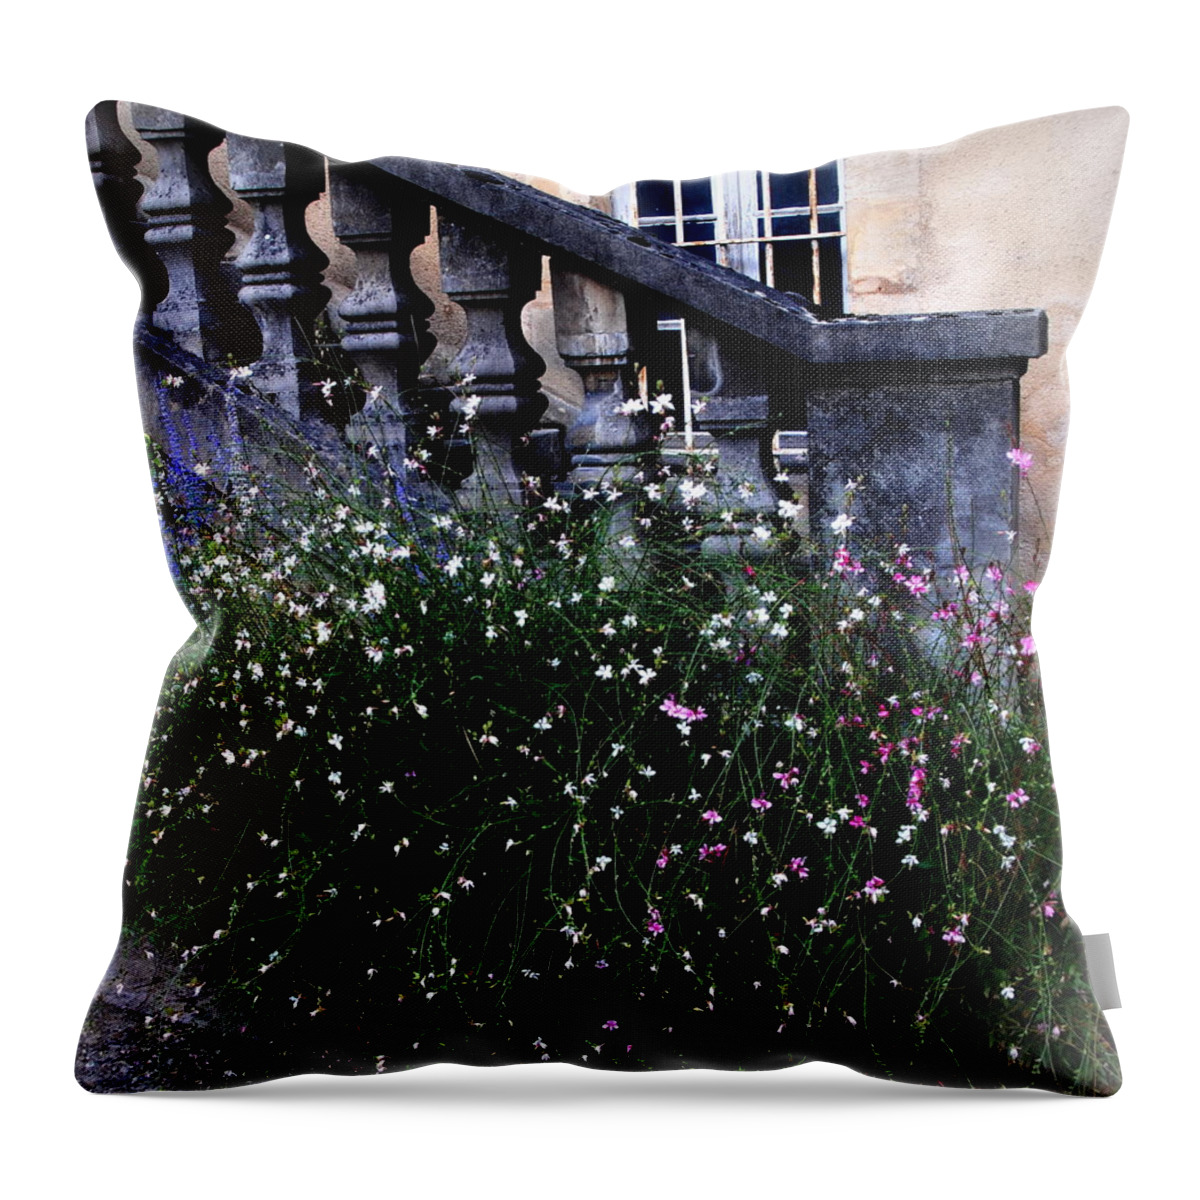 Sarlat Throw Pillow featuring the photograph Stairway in Sarlat France by Jacqueline M Lewis